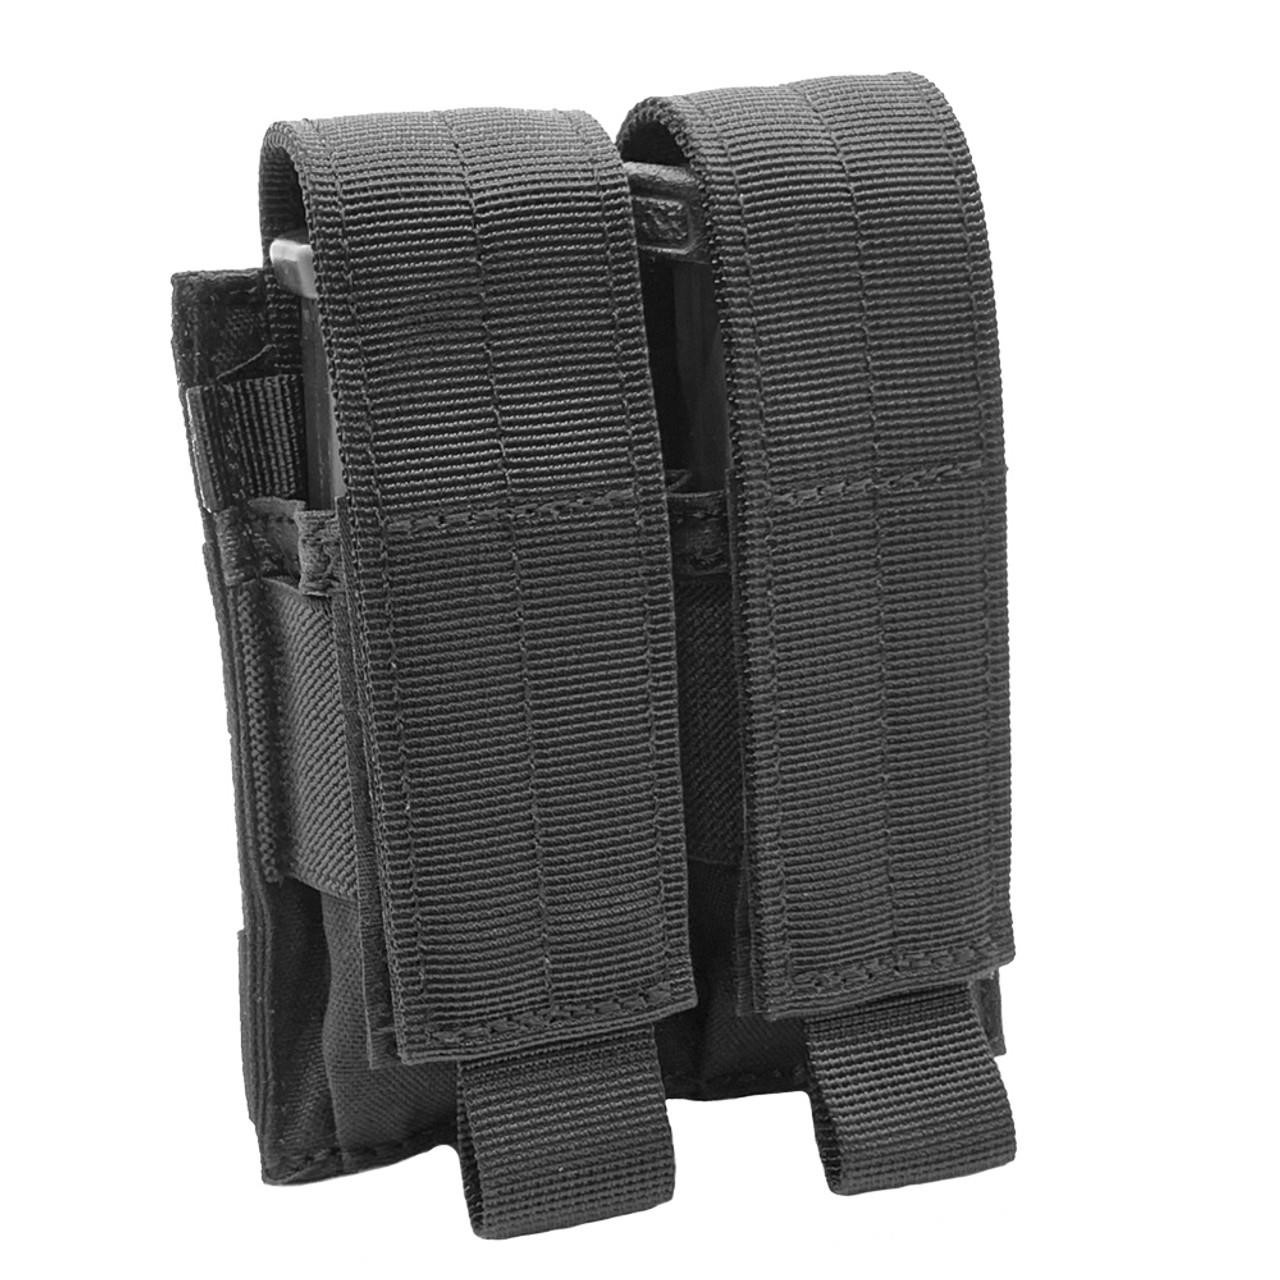  Shellback Tactical Double Pistol Mag Pouch 